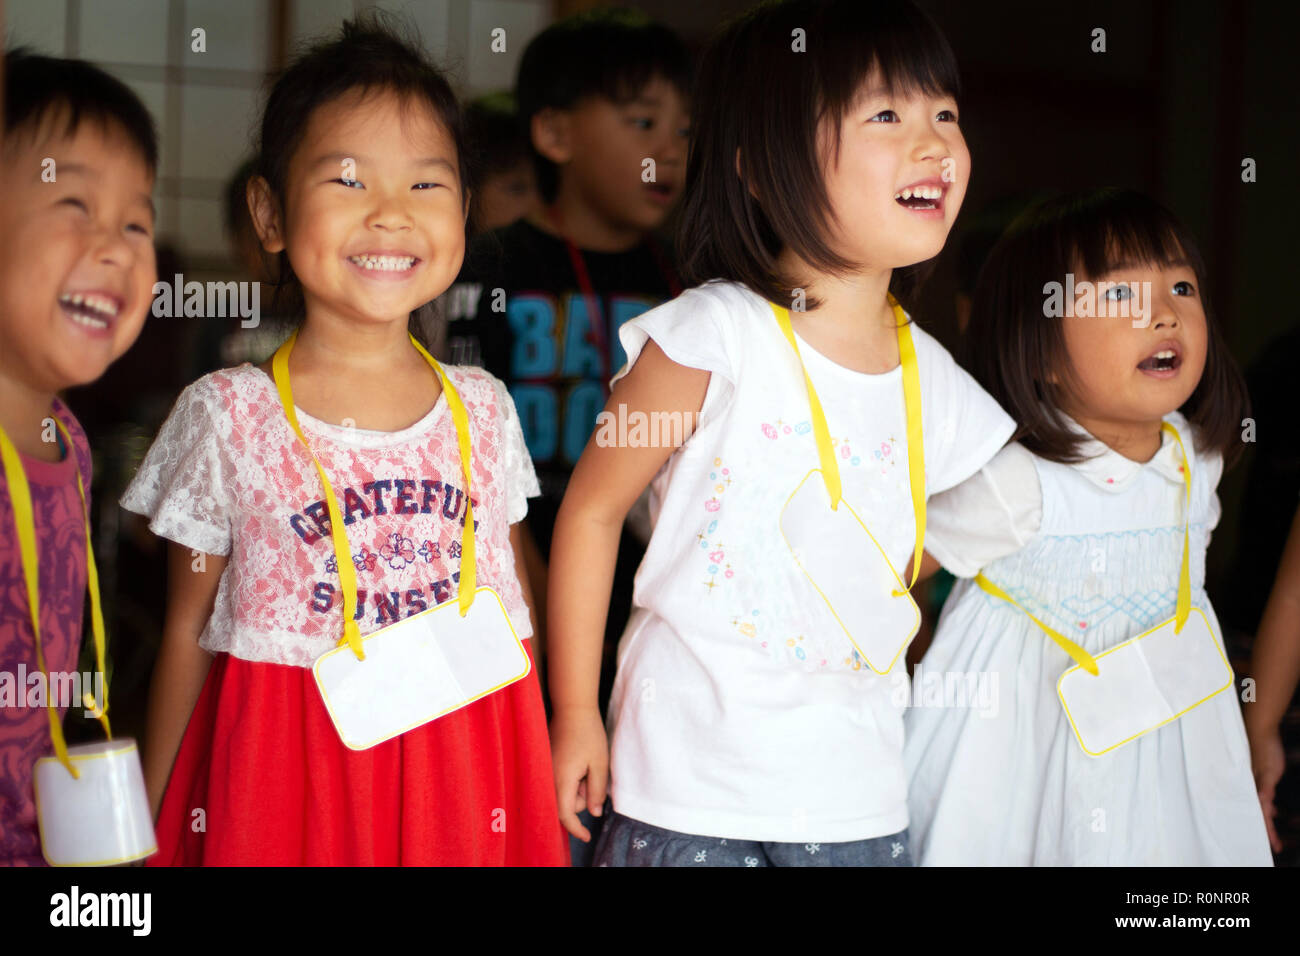 Group of girls and boys wearing name tags singing together in a temple. Stock Photo